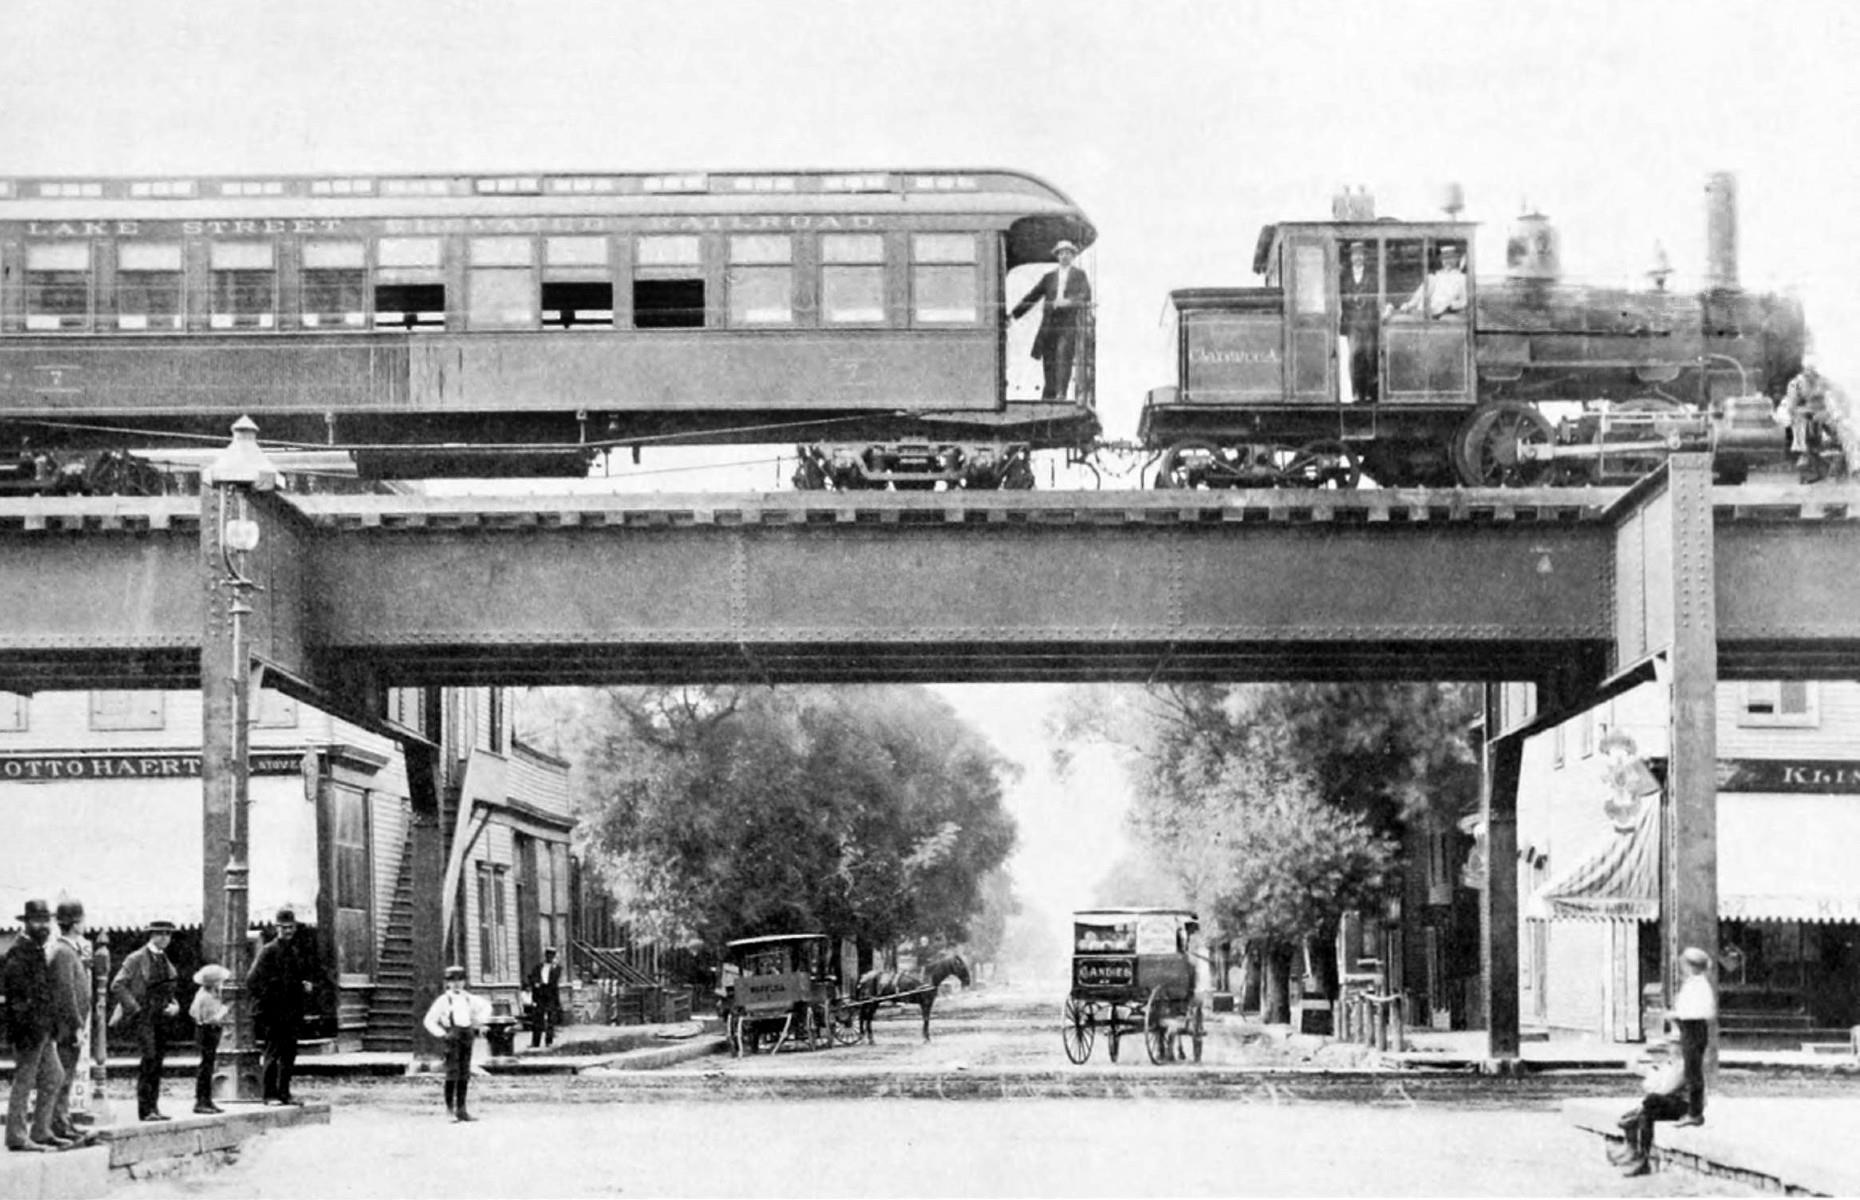 <p>While rail tracks encroached further and further into the Wild West, railways were also taking over the cities of the East Coast, and to keep their urban footprint as small as possible engineers built into the sky. New York’s first elevated railway opened in 1878, and it was joined by Chicago’s first (pictured here) in 1892. Known as 'els,' these raised tracks arrived in Boston in 1901 and in Philadelphia in 1907. The high-rise rails were not to everyone’s tastes, however, and many were later pulled down to be replaced with underground subways.</p>